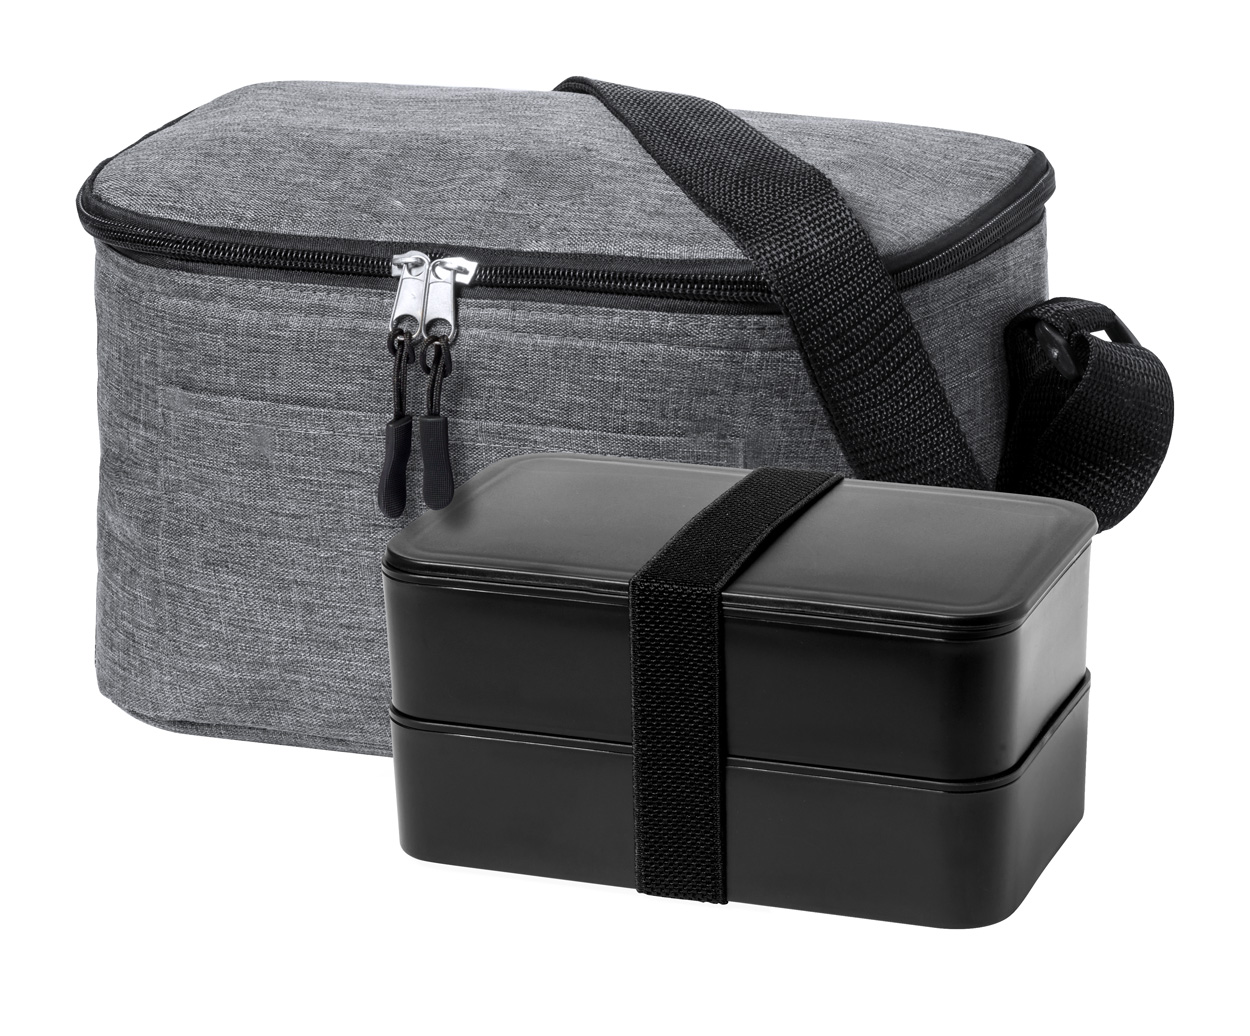 Glaxia cooler bag and lunch box - grey